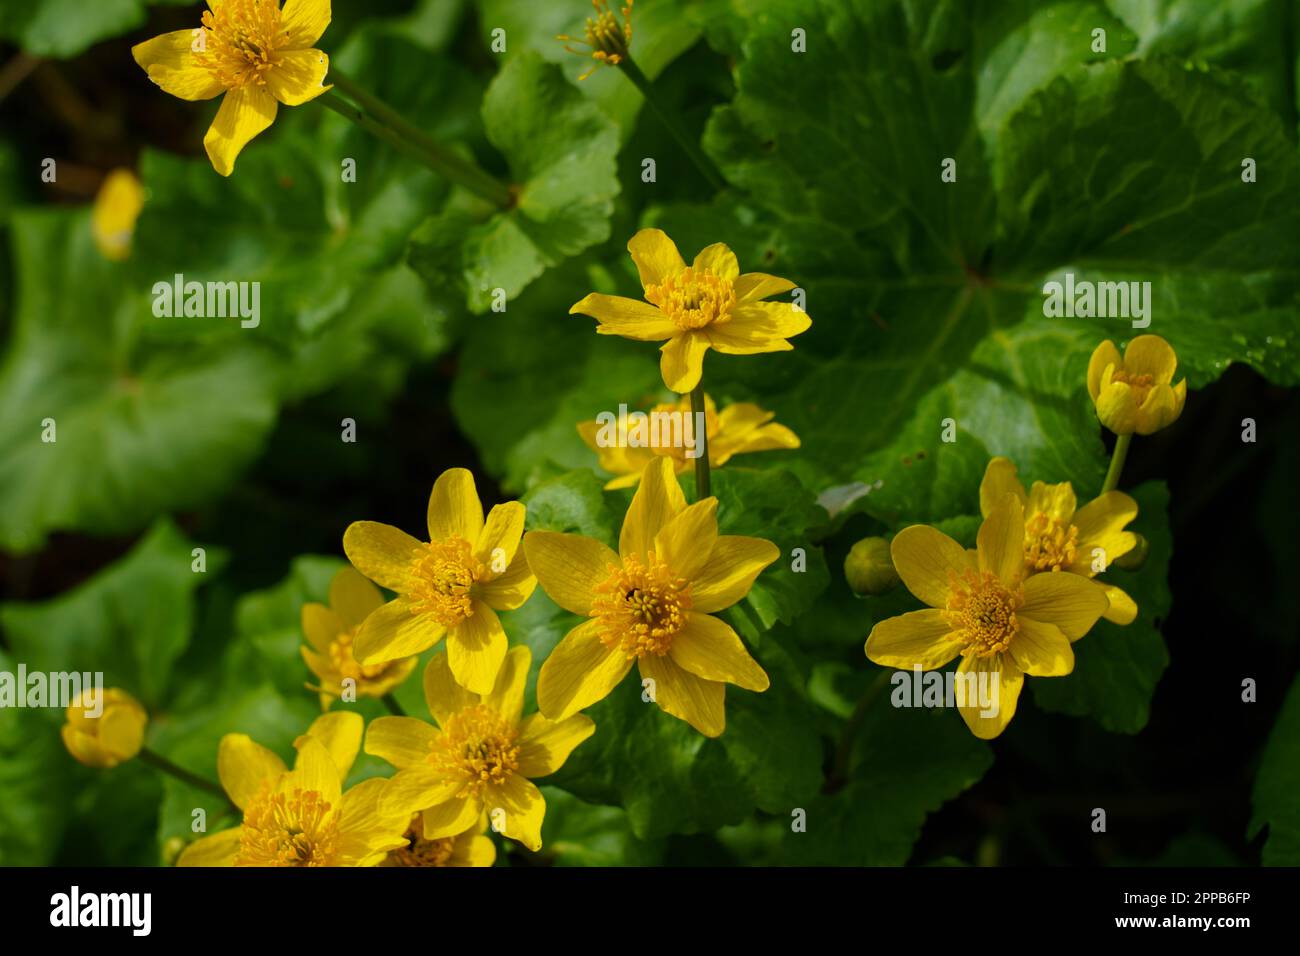 Clusters of vibrant yellow Marsh Marigold flowers with delicate petals with green leaves in the background complement the yellow blossoms. Stock Photo